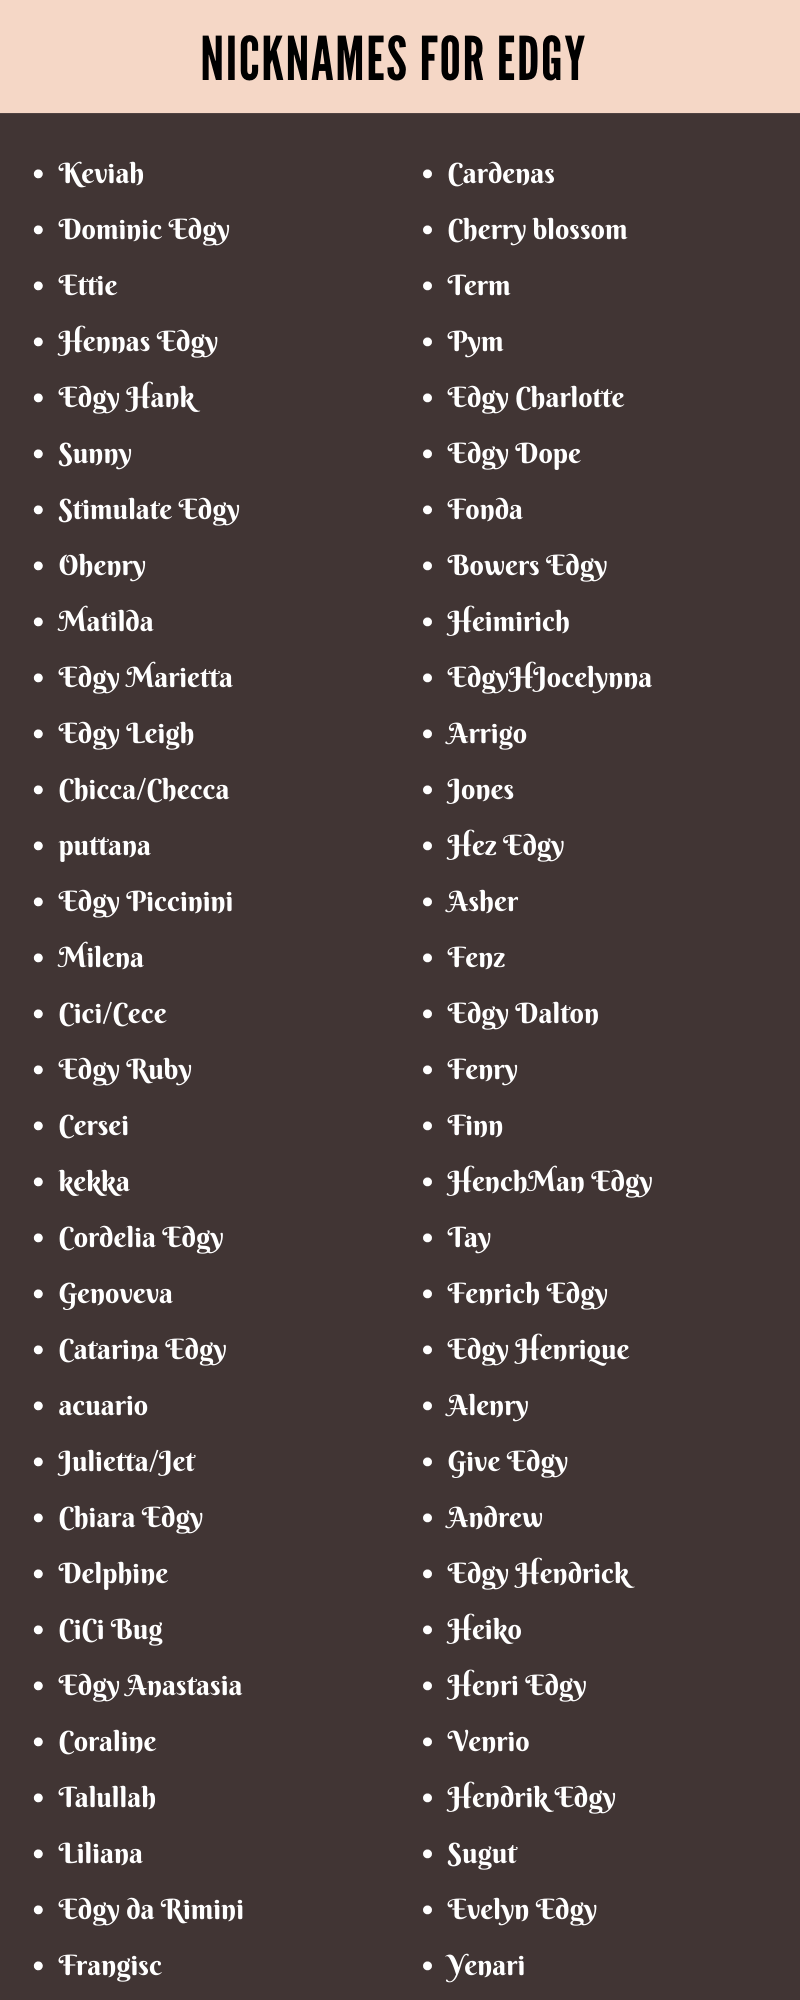 Nicknames For Edgy